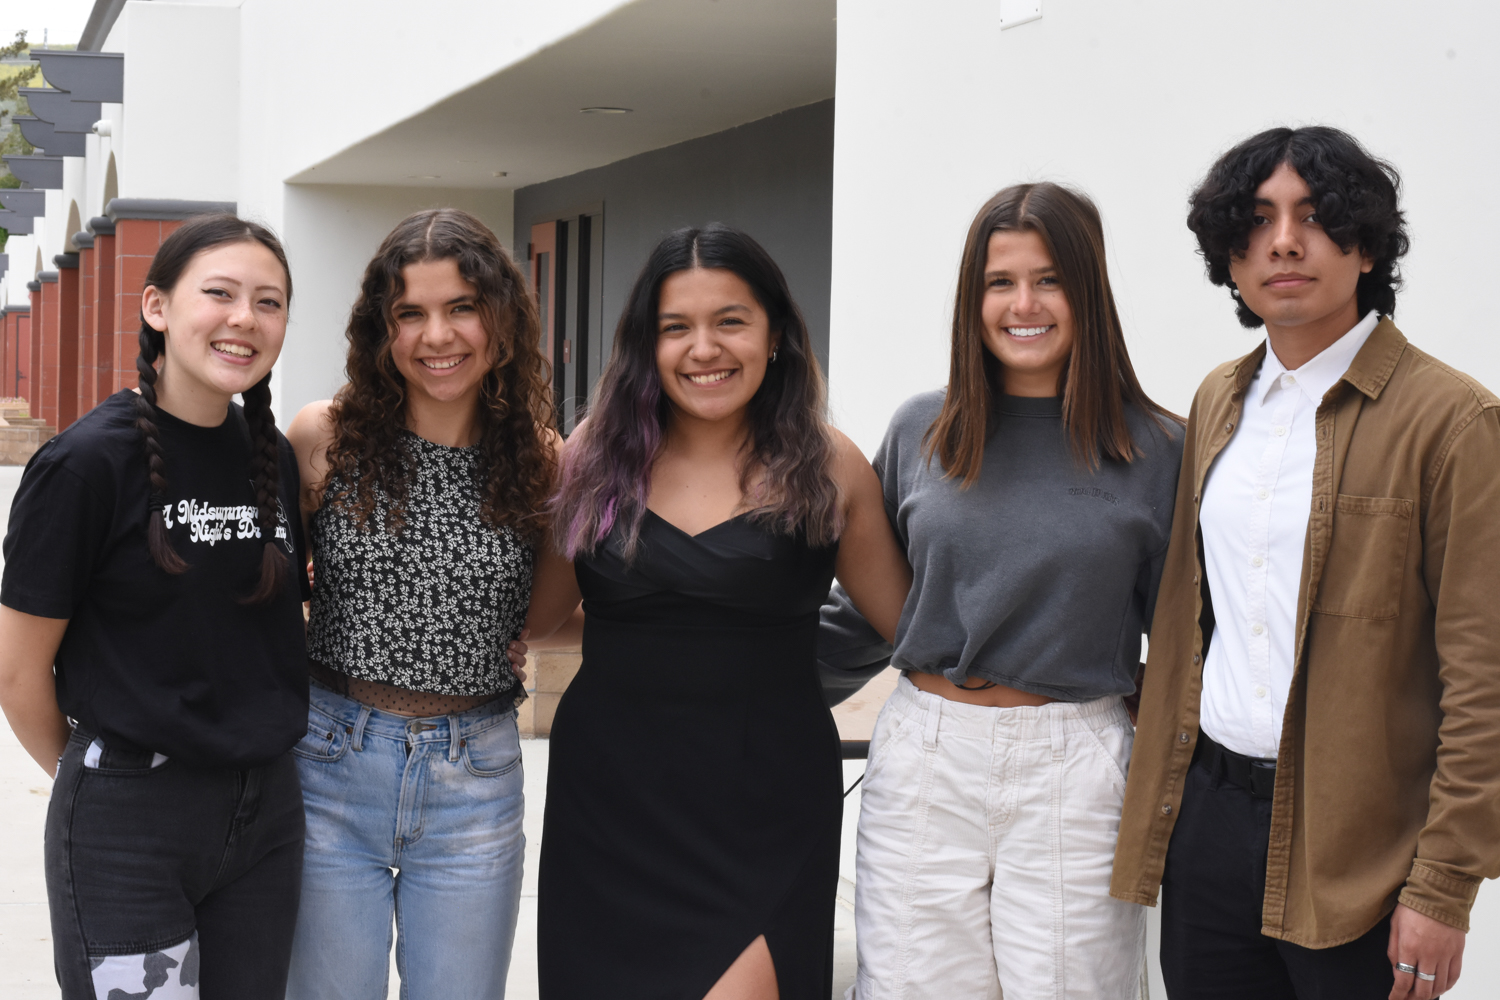 Stallion of the Year nominees of the senior class are Julia Tonai, Rosa Hernandez, Kristina Sabad, Lindsey Gattis and Brandon Sotelo. Students were chosen for their involvement at SJHHS and knowledge of what it means to Ride for the Brand. The winner will be announced at Senior Awards. 